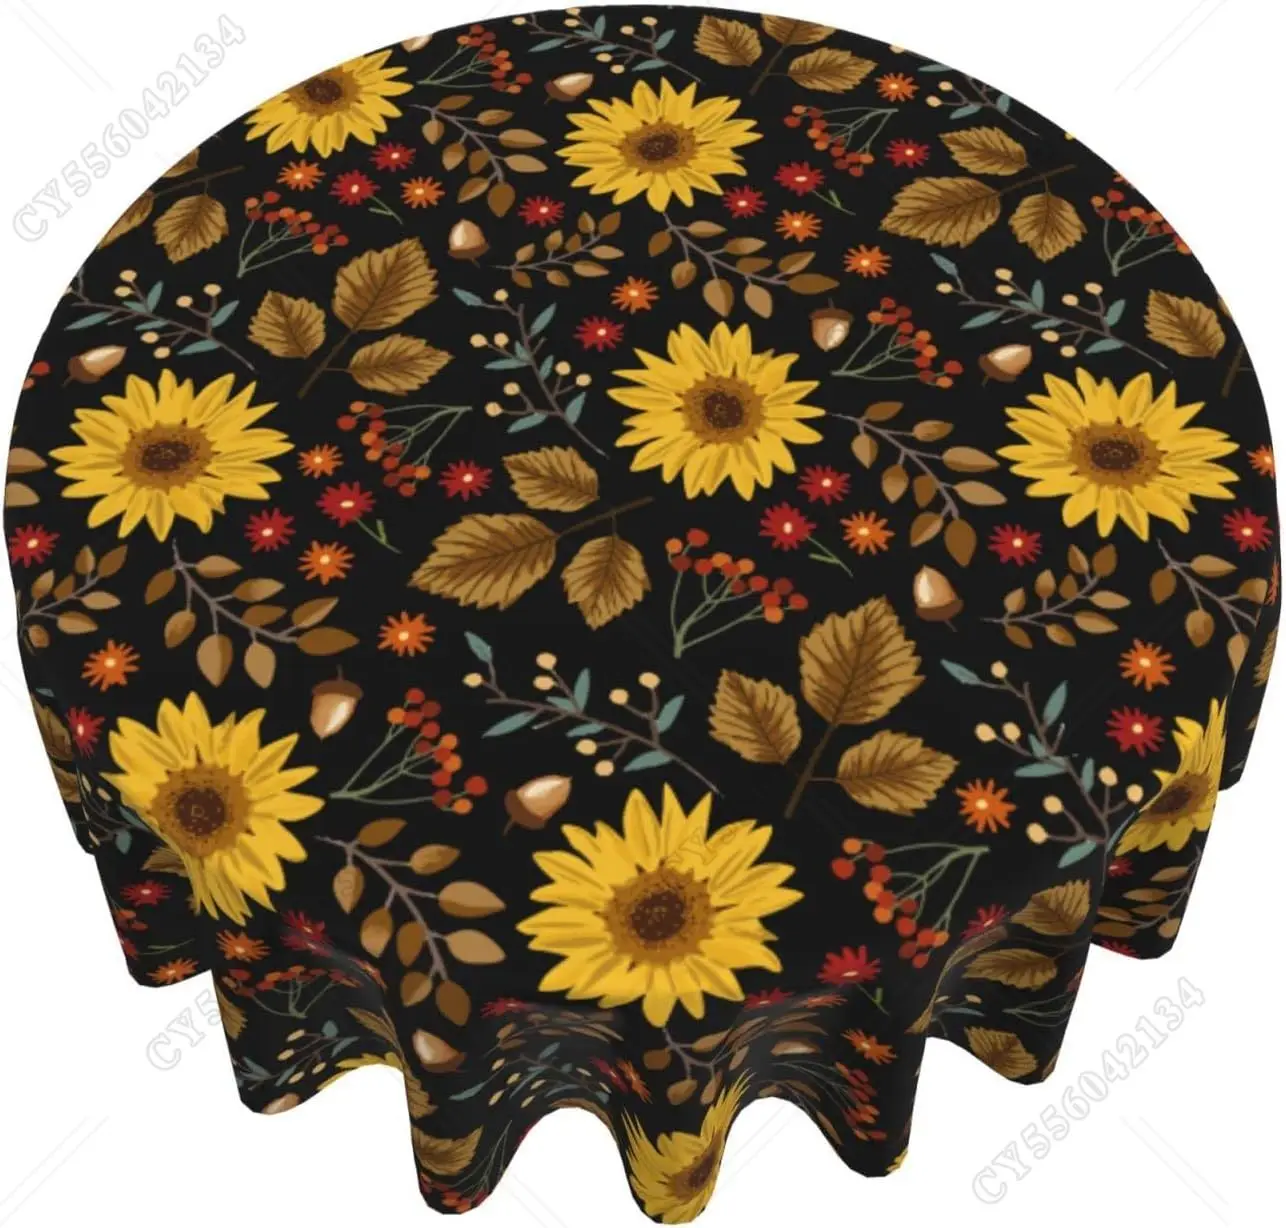 

Fall Sunflower Round Tablecloth Rustic Fallen Leaves Tablecloths Vintage Sunflowers Waterproof Farmhouse Table Cloth Cover